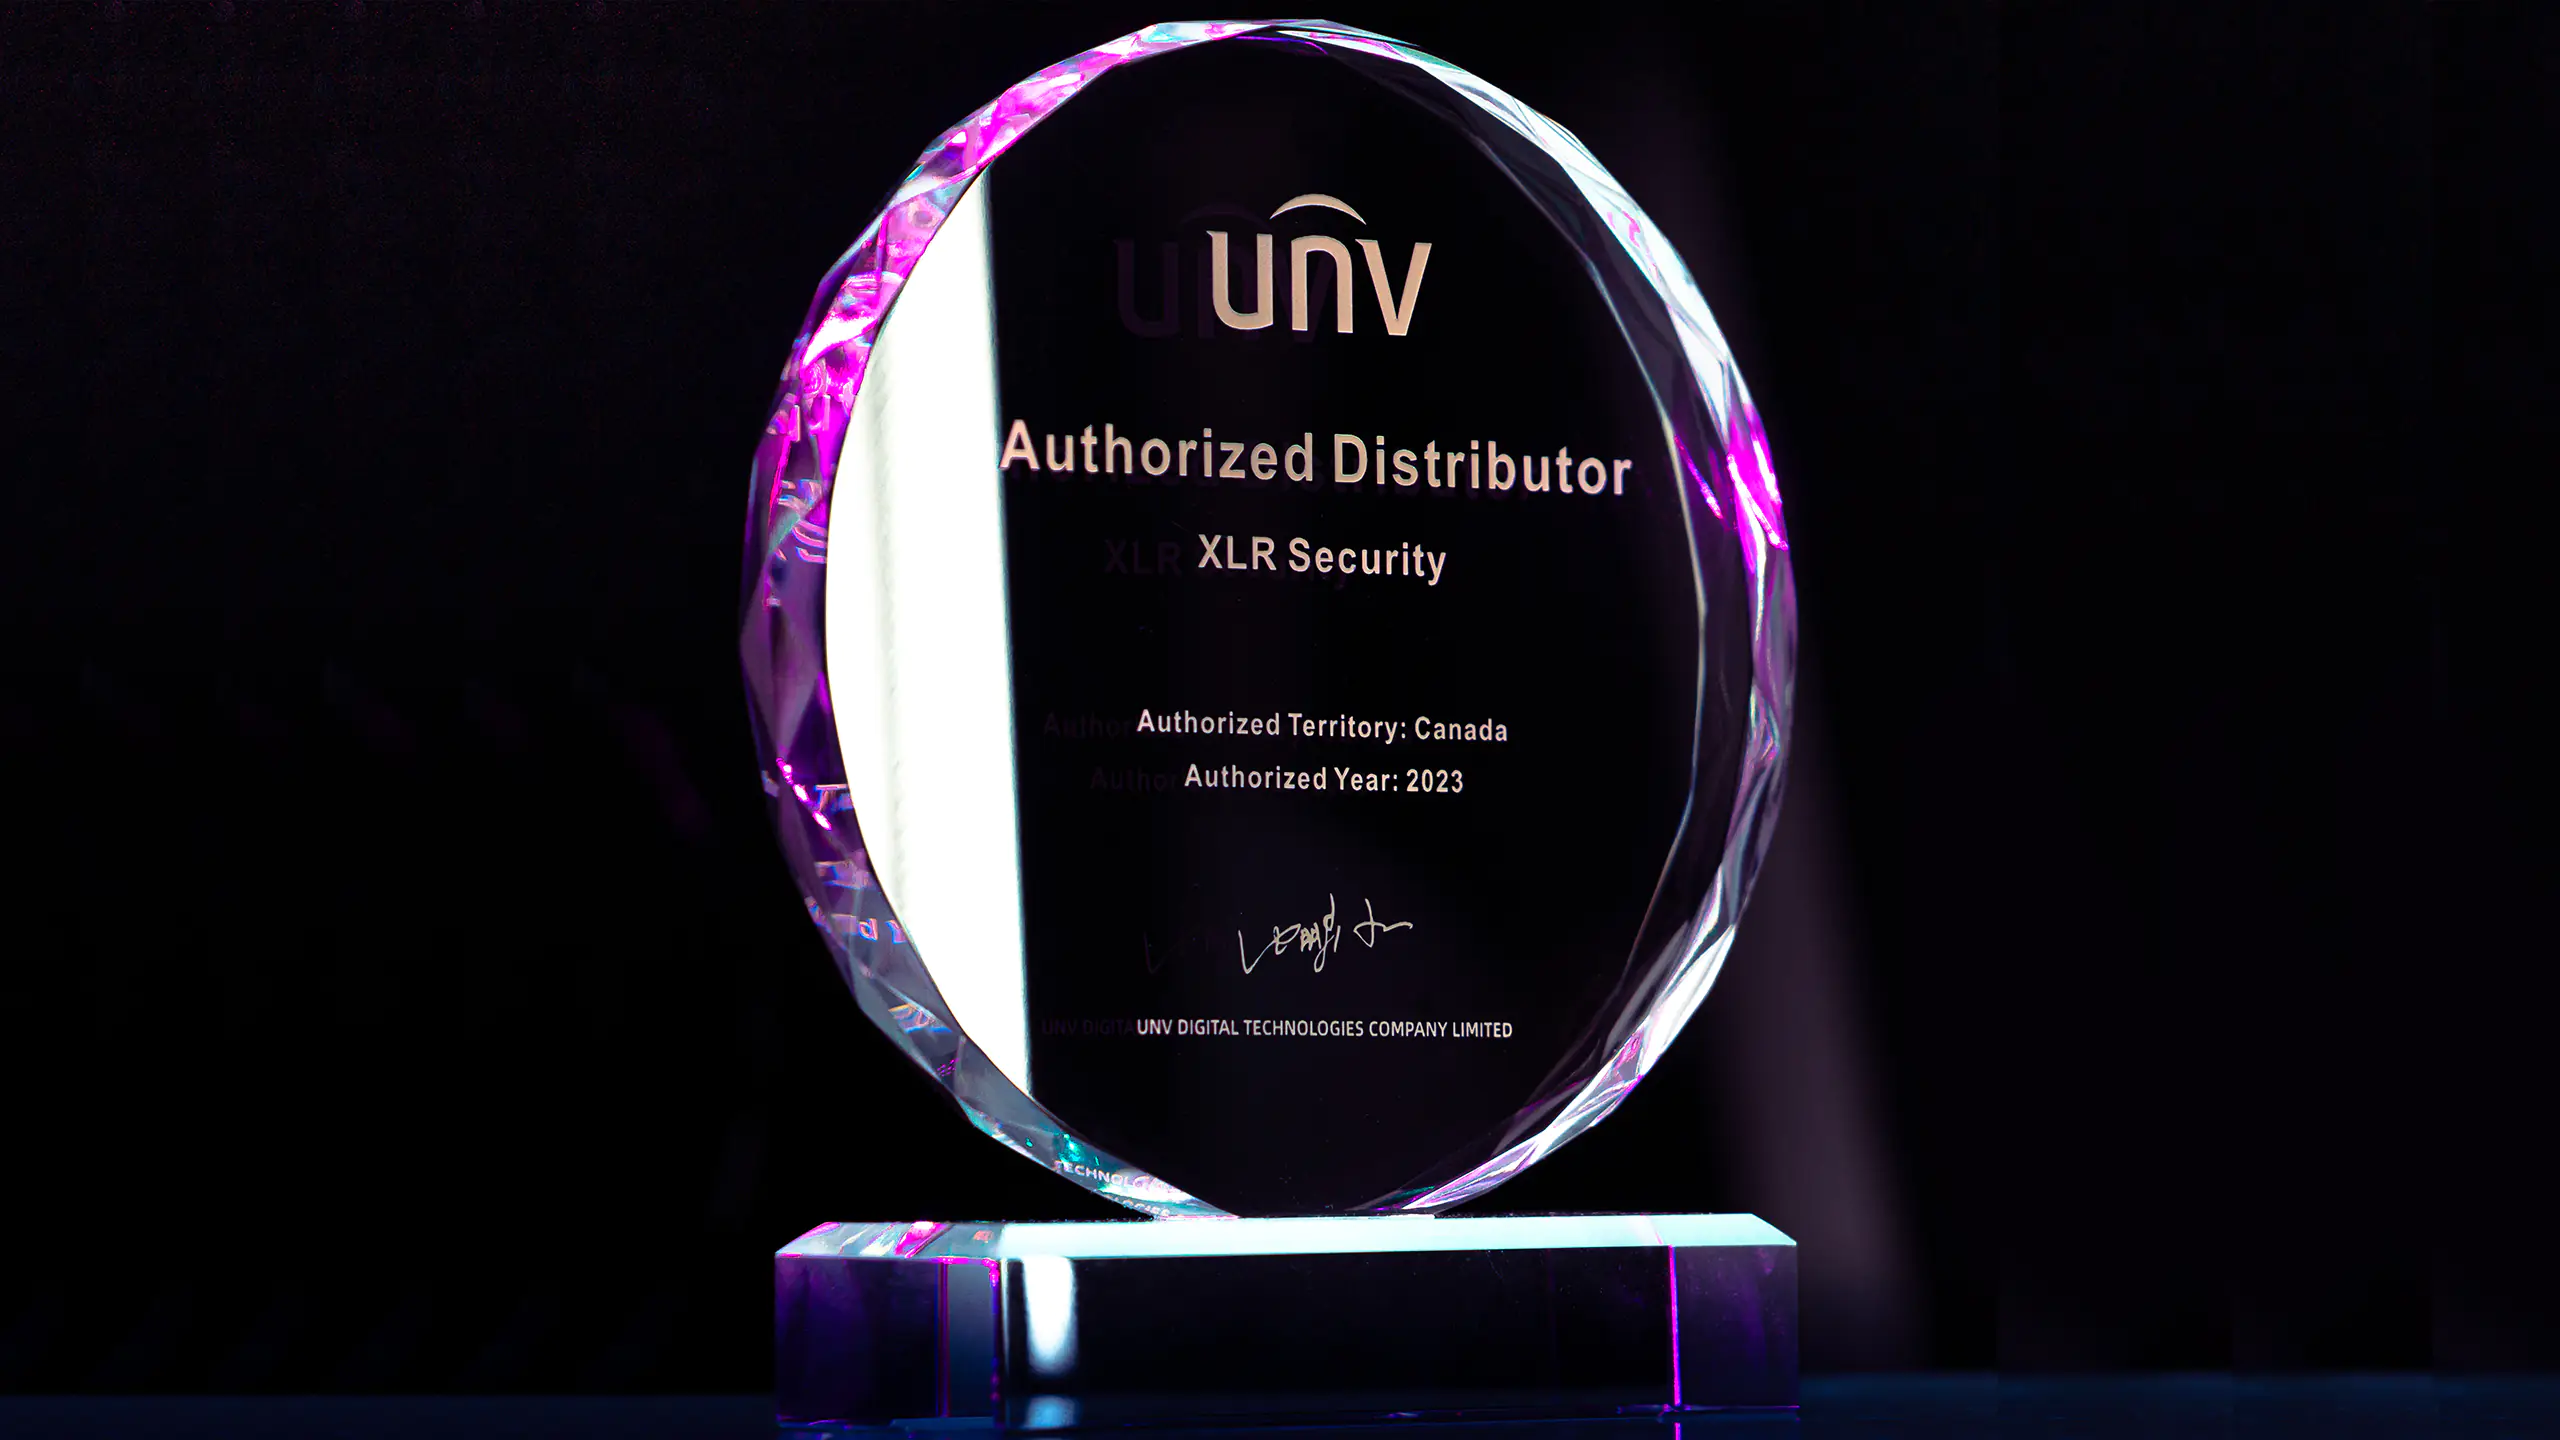 A glass plaque that says 'UNV Authorized Distributor XLR Security'.